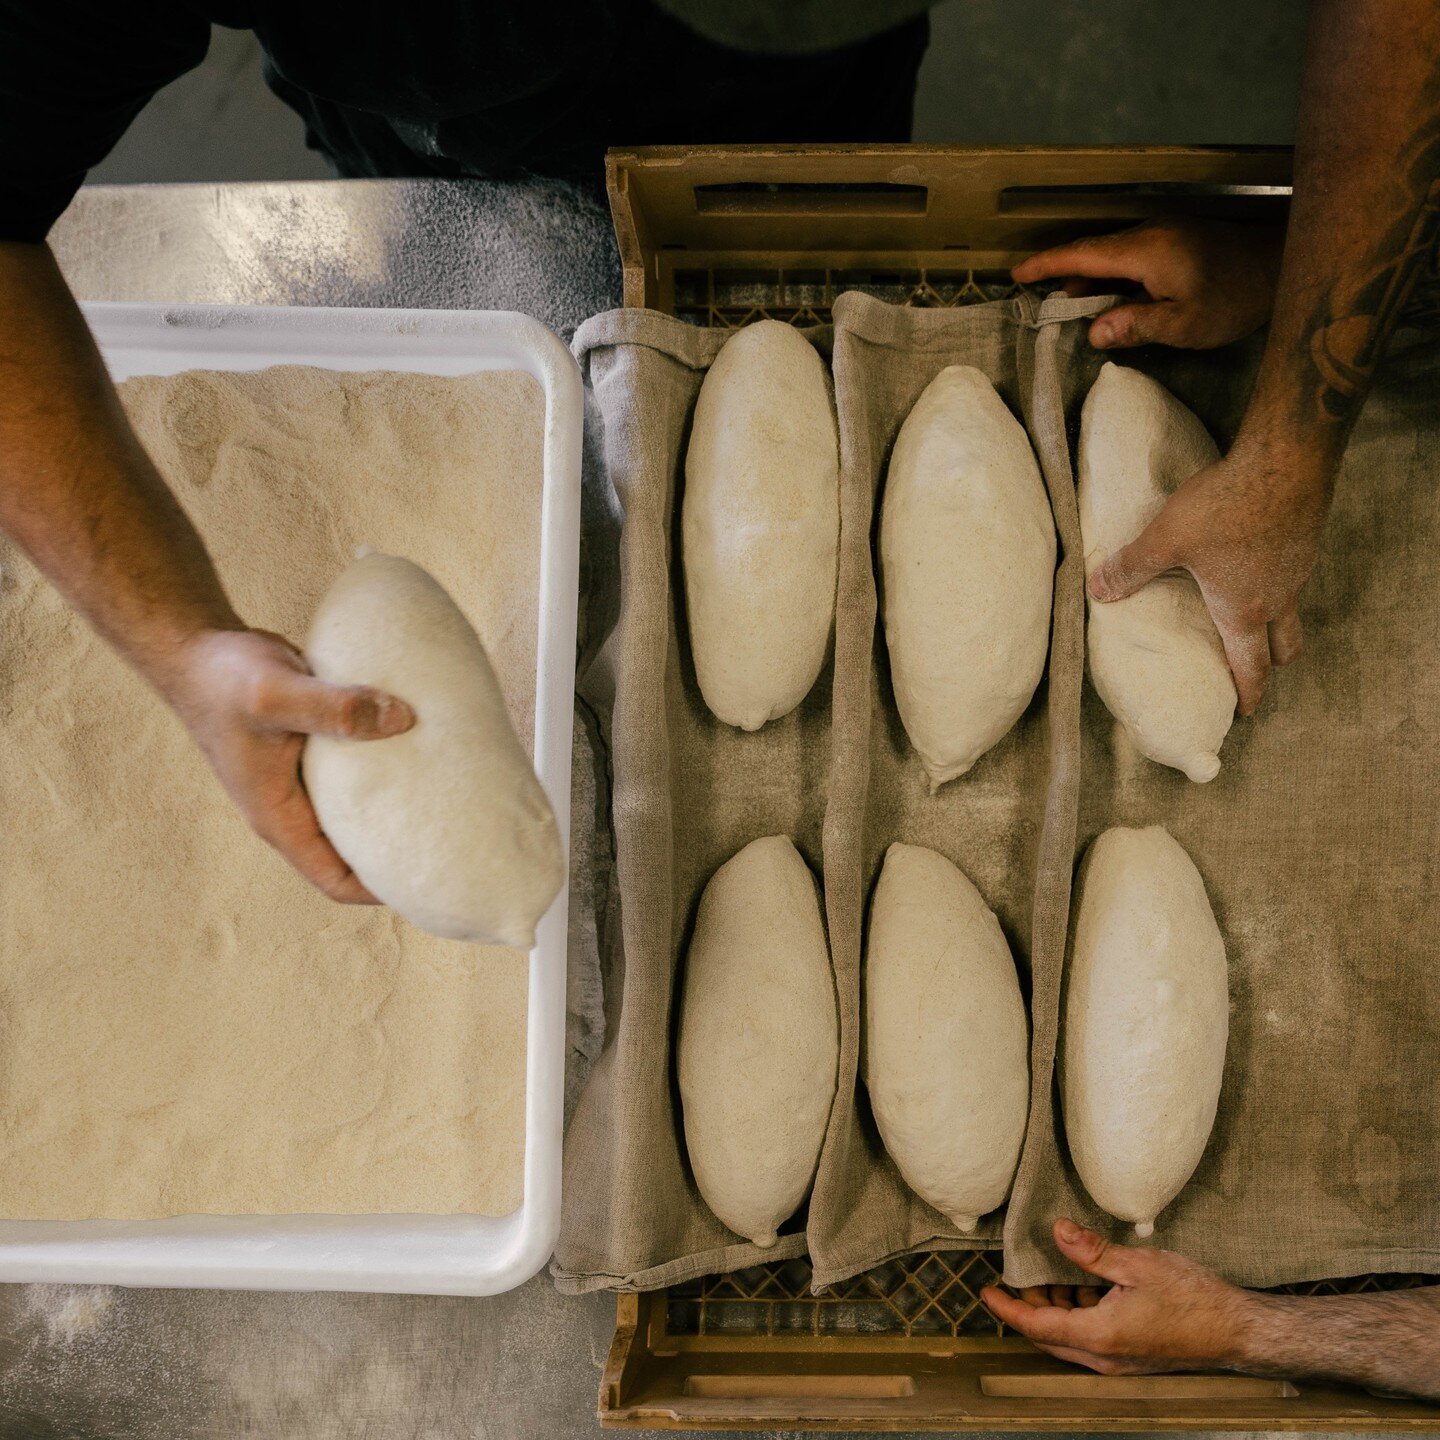 True to the artisan heritage of baking, @thebreadsocial team use traditional methods. There&rsquo;s something fulfilling about the way they use ingredients straight from the earth; preserving their integrity and turning them into something beautiful.